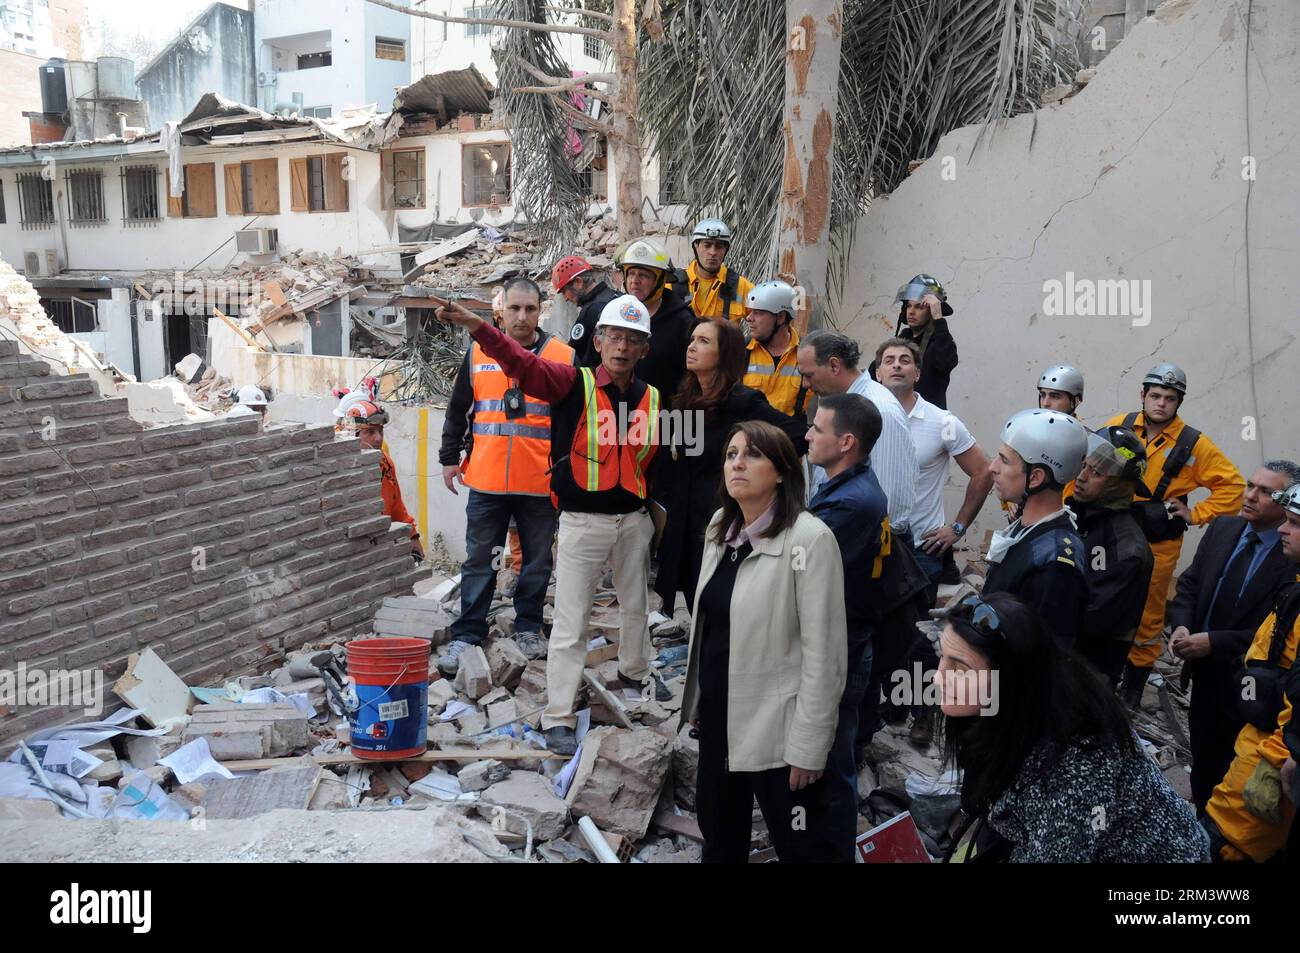 Bildnummer: 60337250  Datum: 07.08.2013  Copyright: imago/Xinhua Argentina s President Cristina Fernandez de Kirchner (3rd L) visits the site of a building explosion in Rosario City, around 300 km away from Buenos Aires city, capital of Argentina, on Aug. 7, 2013. A strong explosion shook buildings in northeastern Argentina Tuesday morning, killing at least 10 and injuring more than 60 others, local authorities confirmed. The government of Argentina Wednesday declared two days of national mourning for the 10 fatal victims of an explosion in an apartment building in the northern city of Rosario Stock Photo